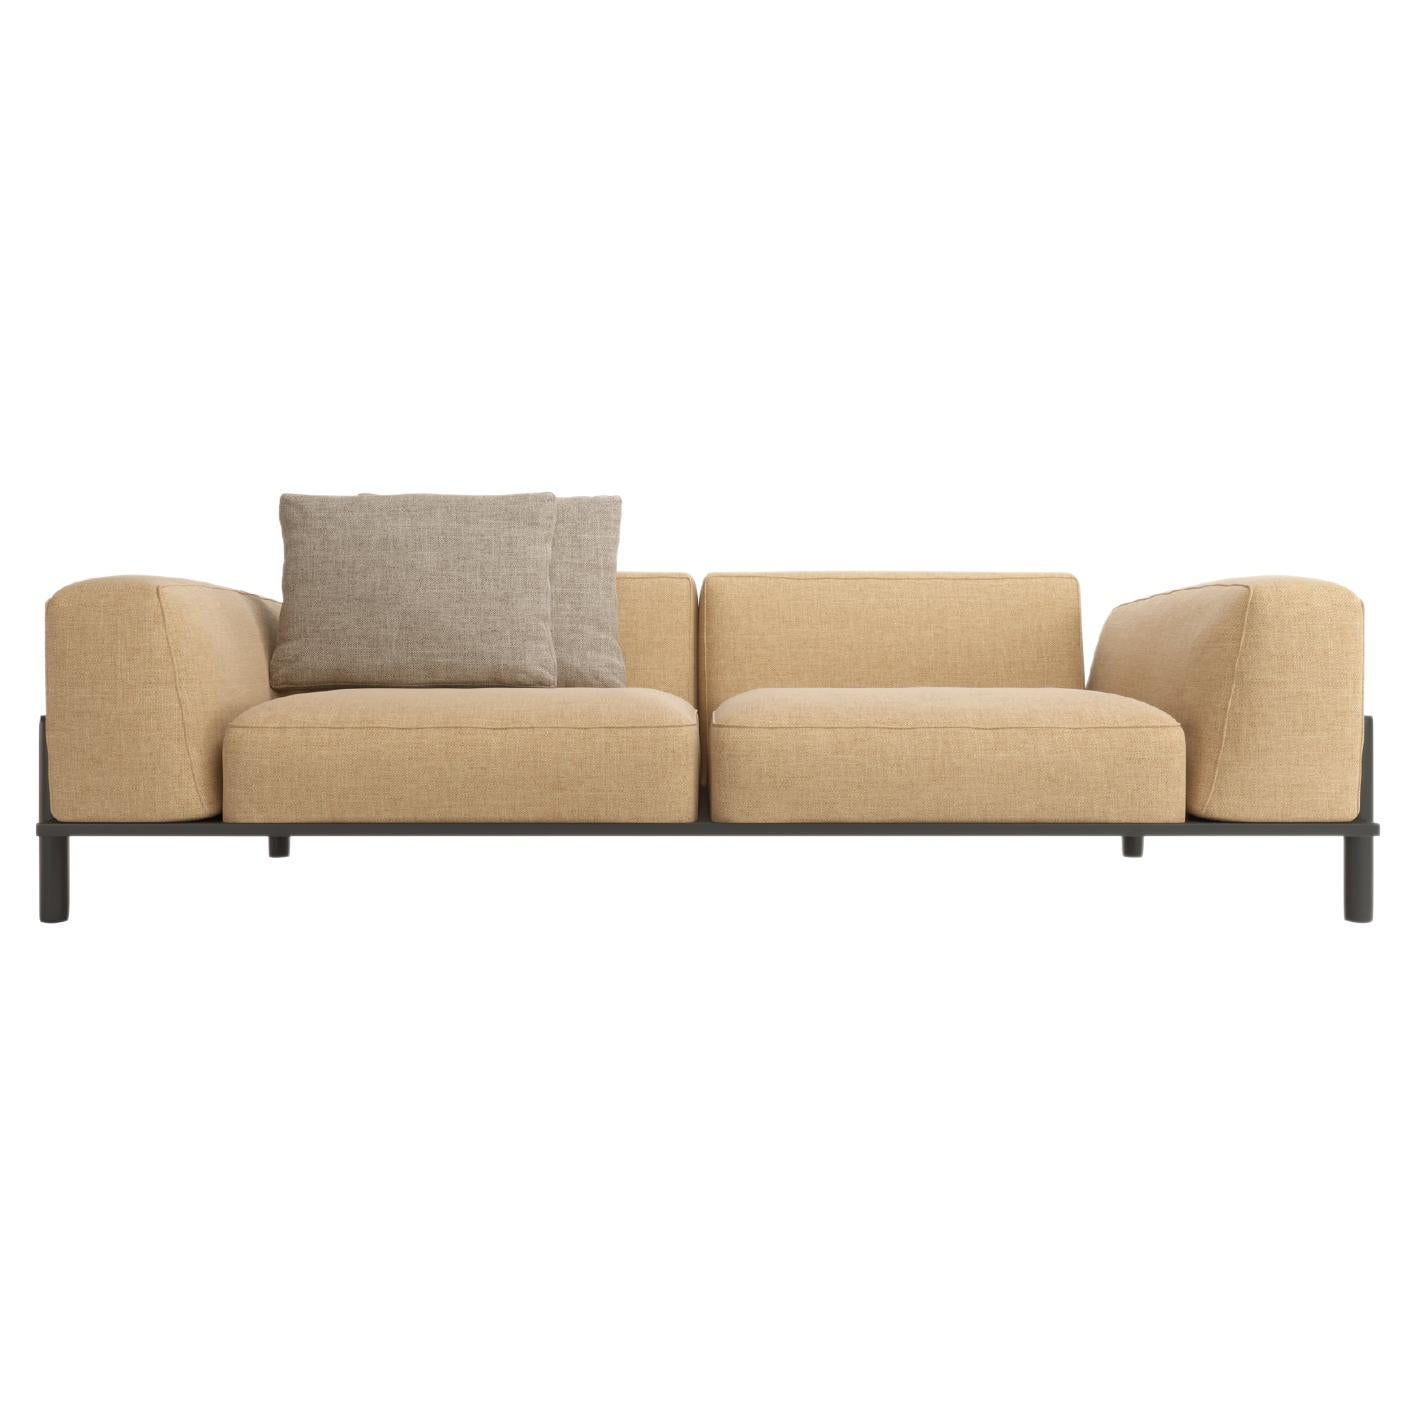 Club 2 seats sofa, upholstered with lacquered iron details